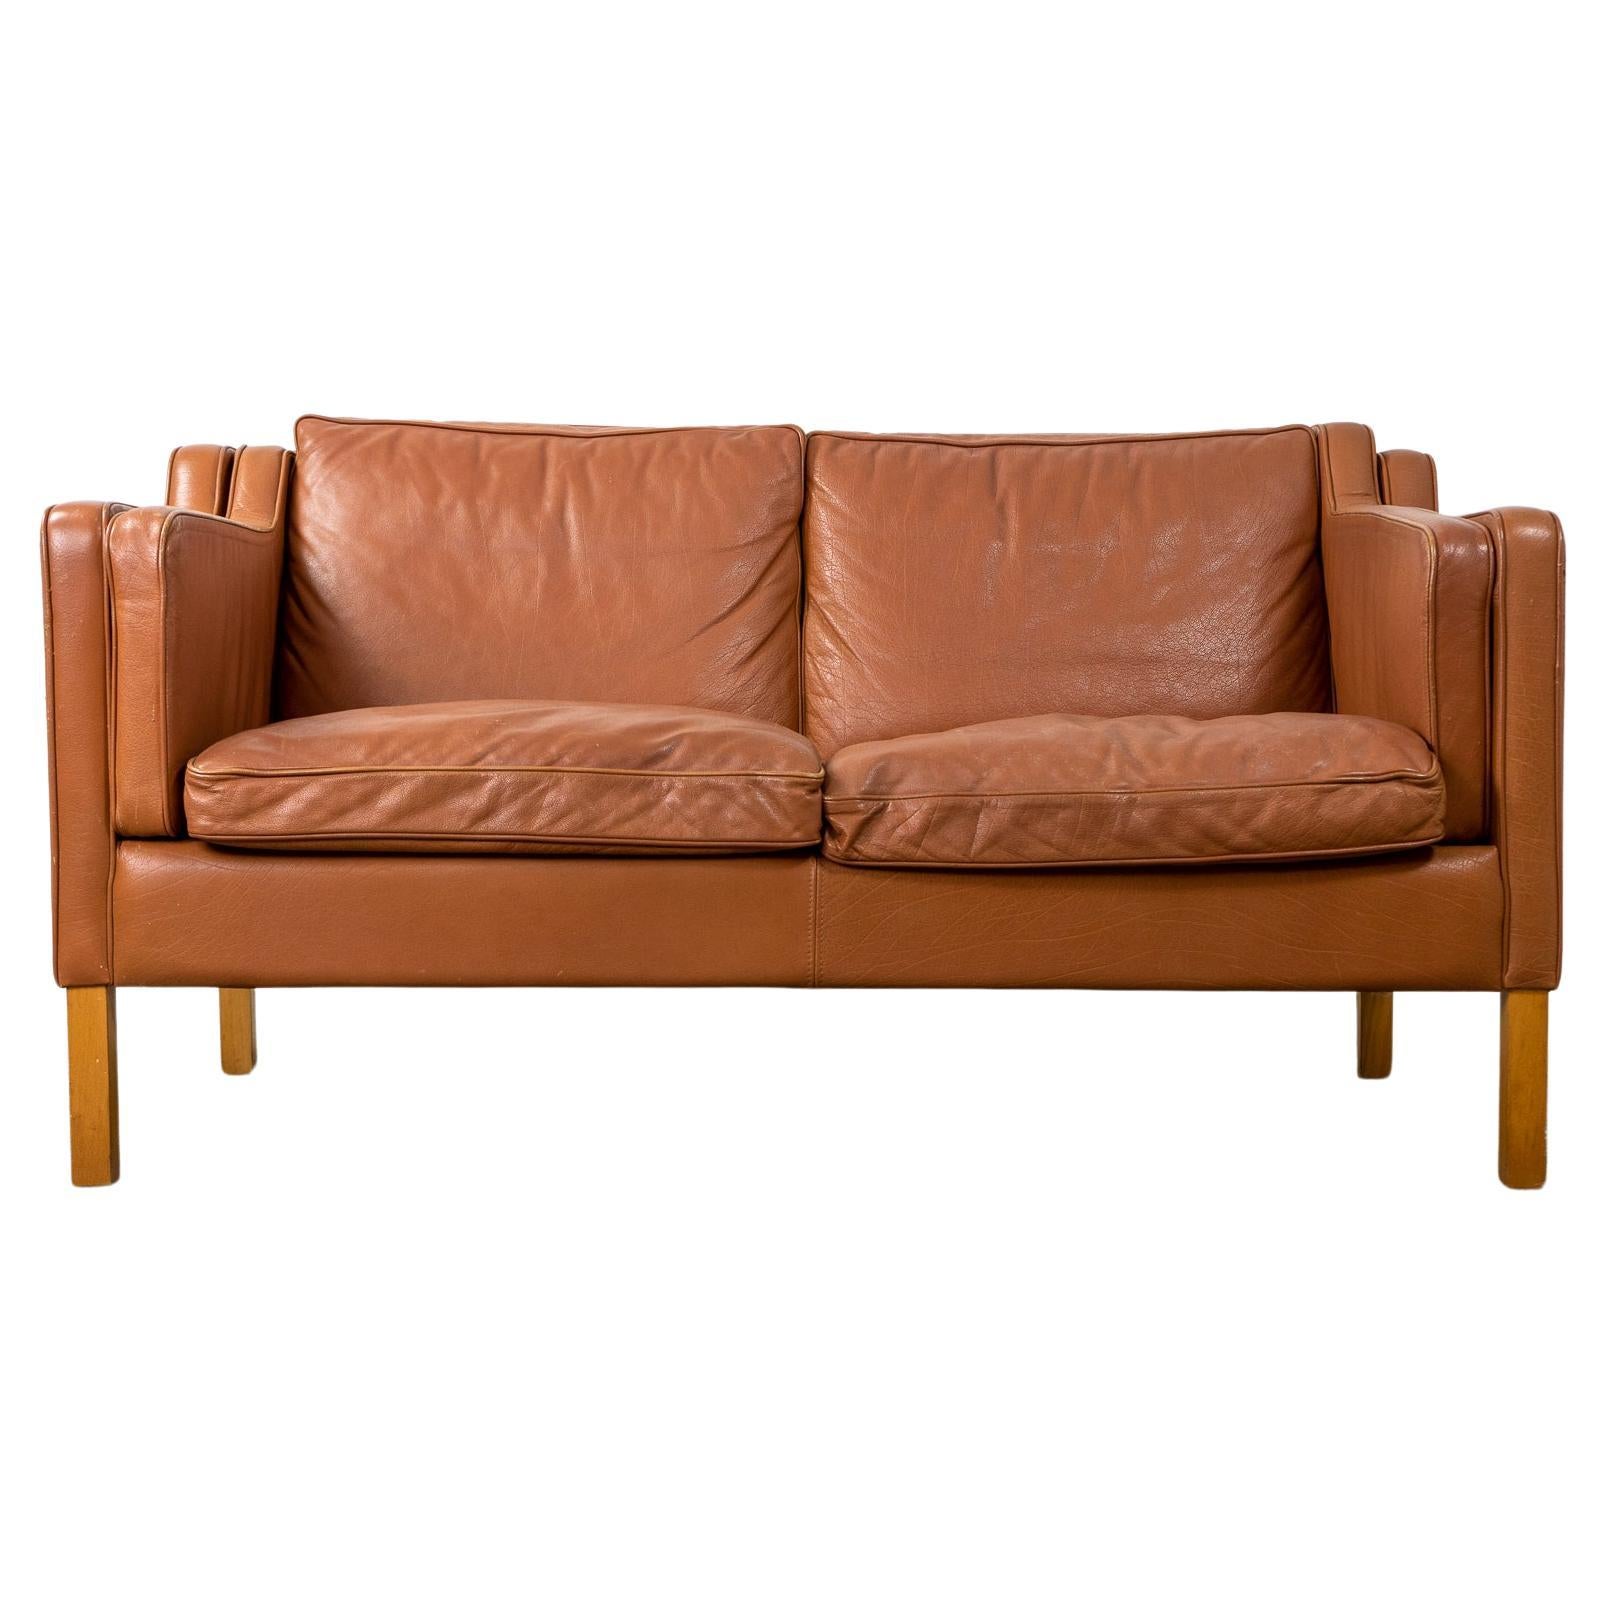 Danish Modern Leather Loveseat by Stouby